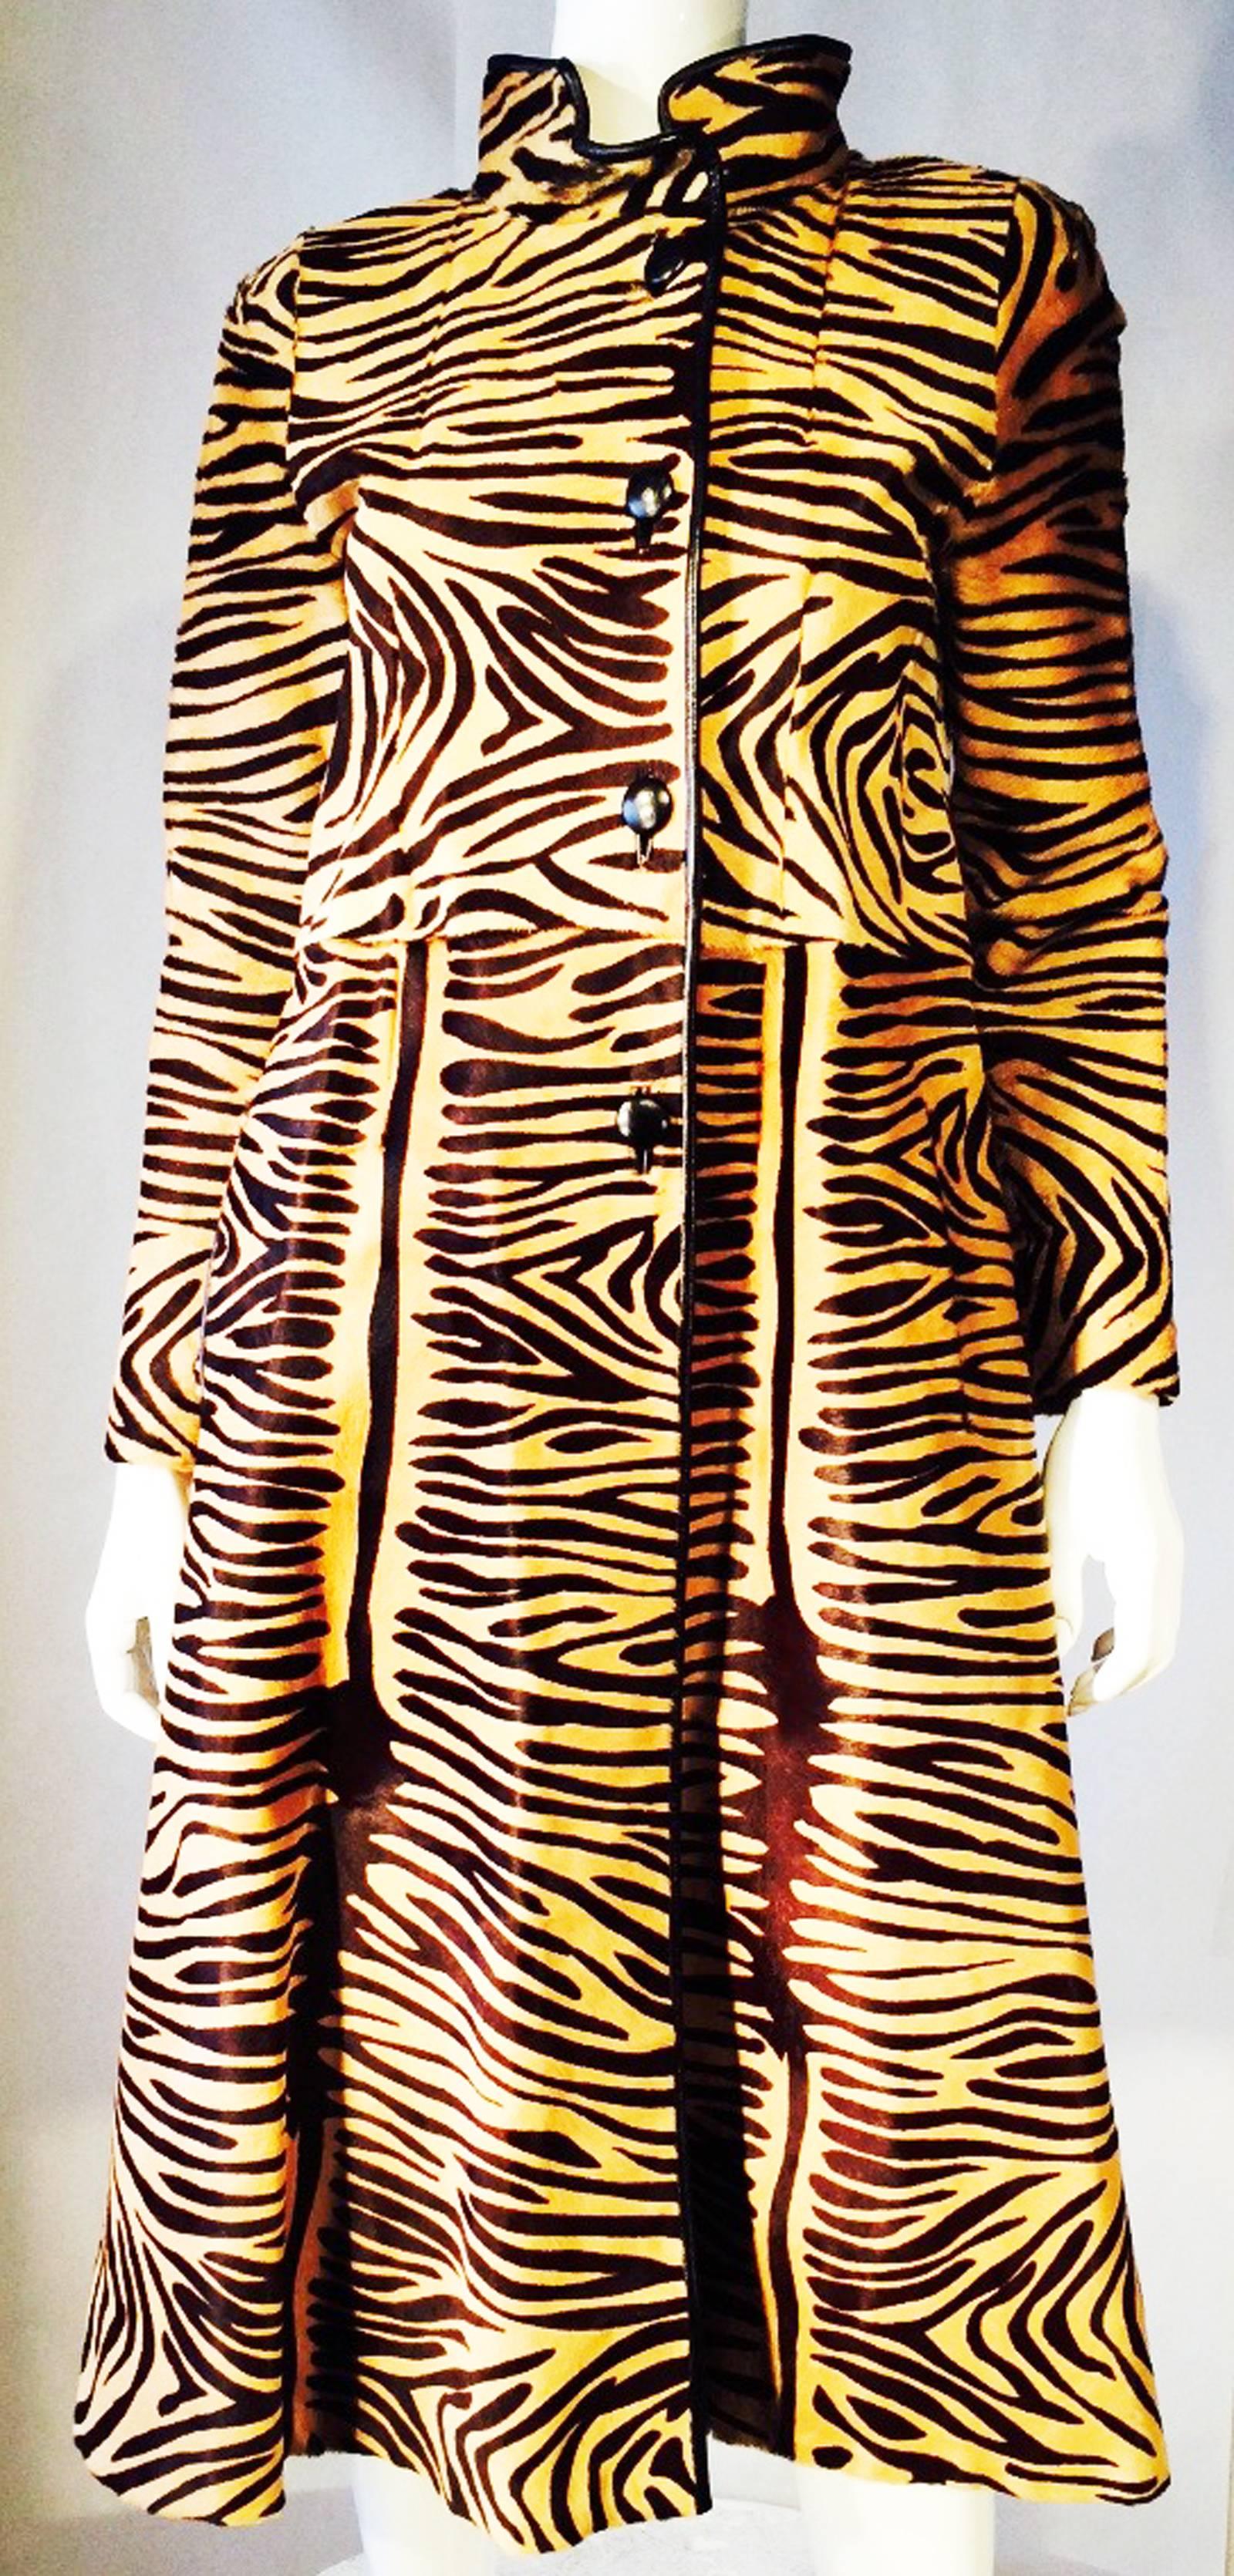 A fine and rare vintage Christian Dior couture pony hair coat. Hand-printed tiger stripe item features precision seam panel construction and black leather welted trim with hidden side pockets. Item includes US fur registration label and 1950s era I.